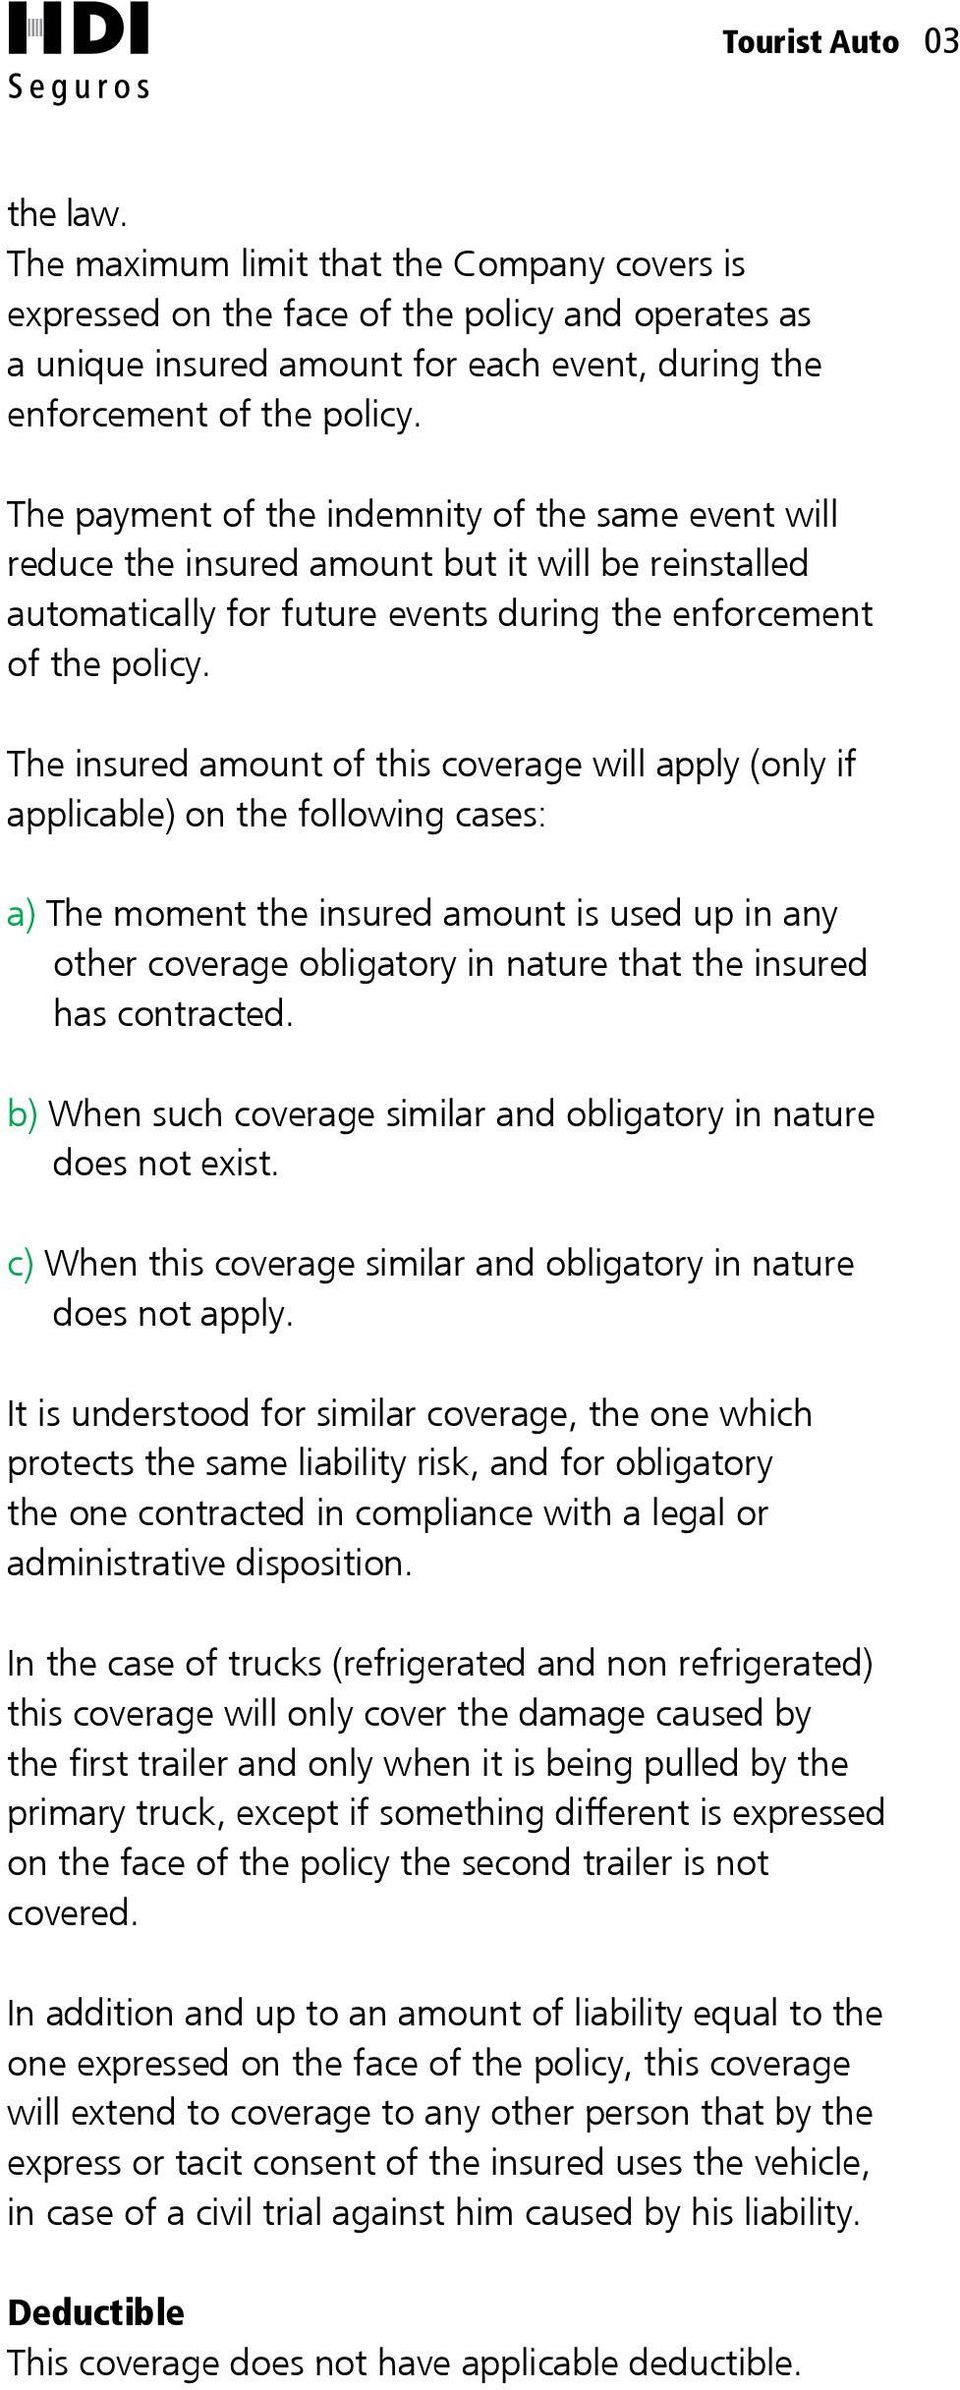 The insured amount of this coverage will apply (only if applicable) on the following cases: a) The moment the insured amount is used up in any other coverage obligatory in nature that the insured has